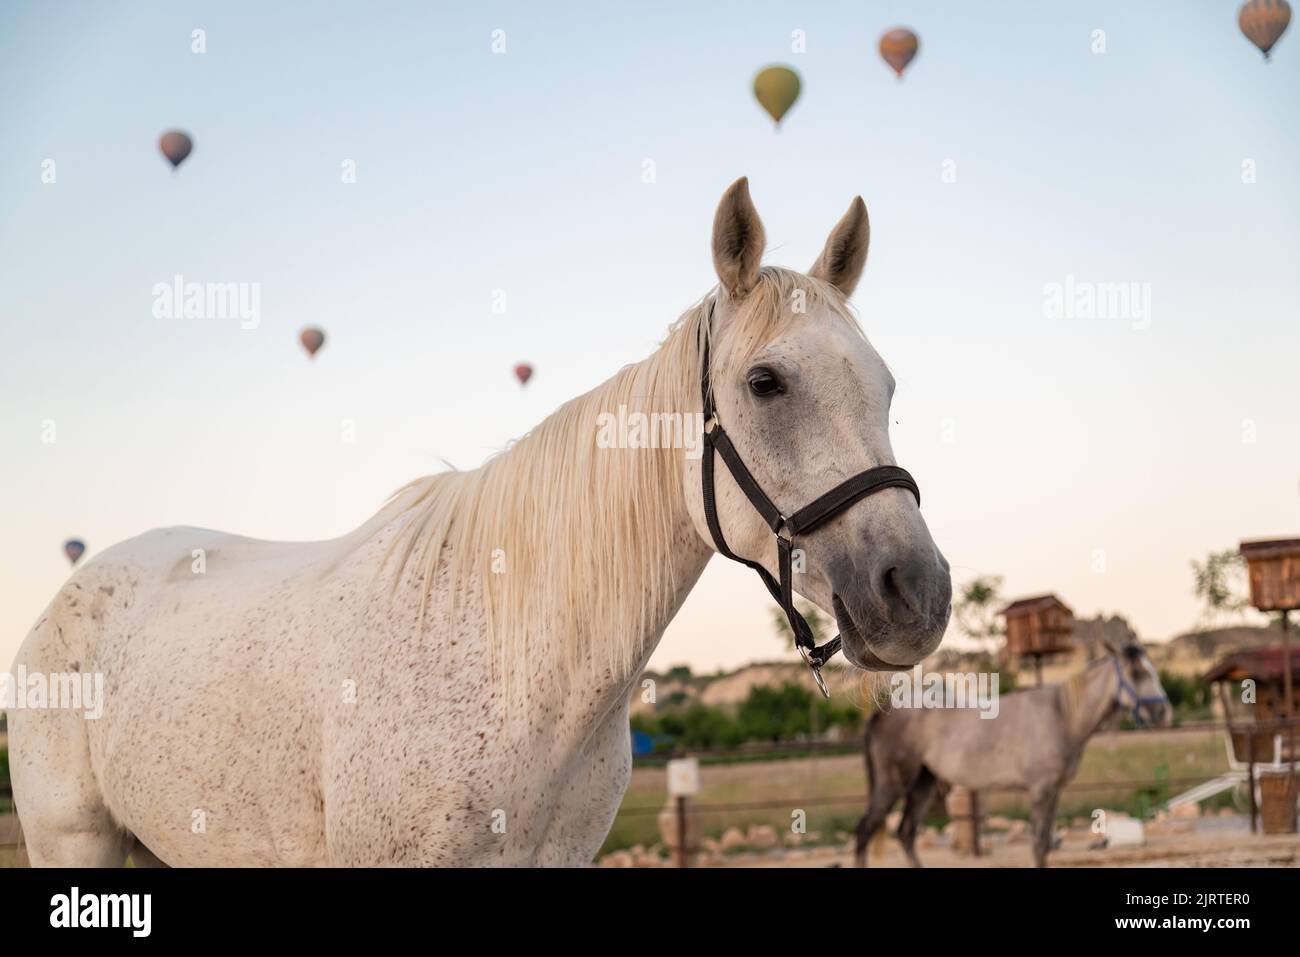 Portrait of a curious white horse on the sunrise with floating balloons on the background in Goreme, Turkey Stock Photo